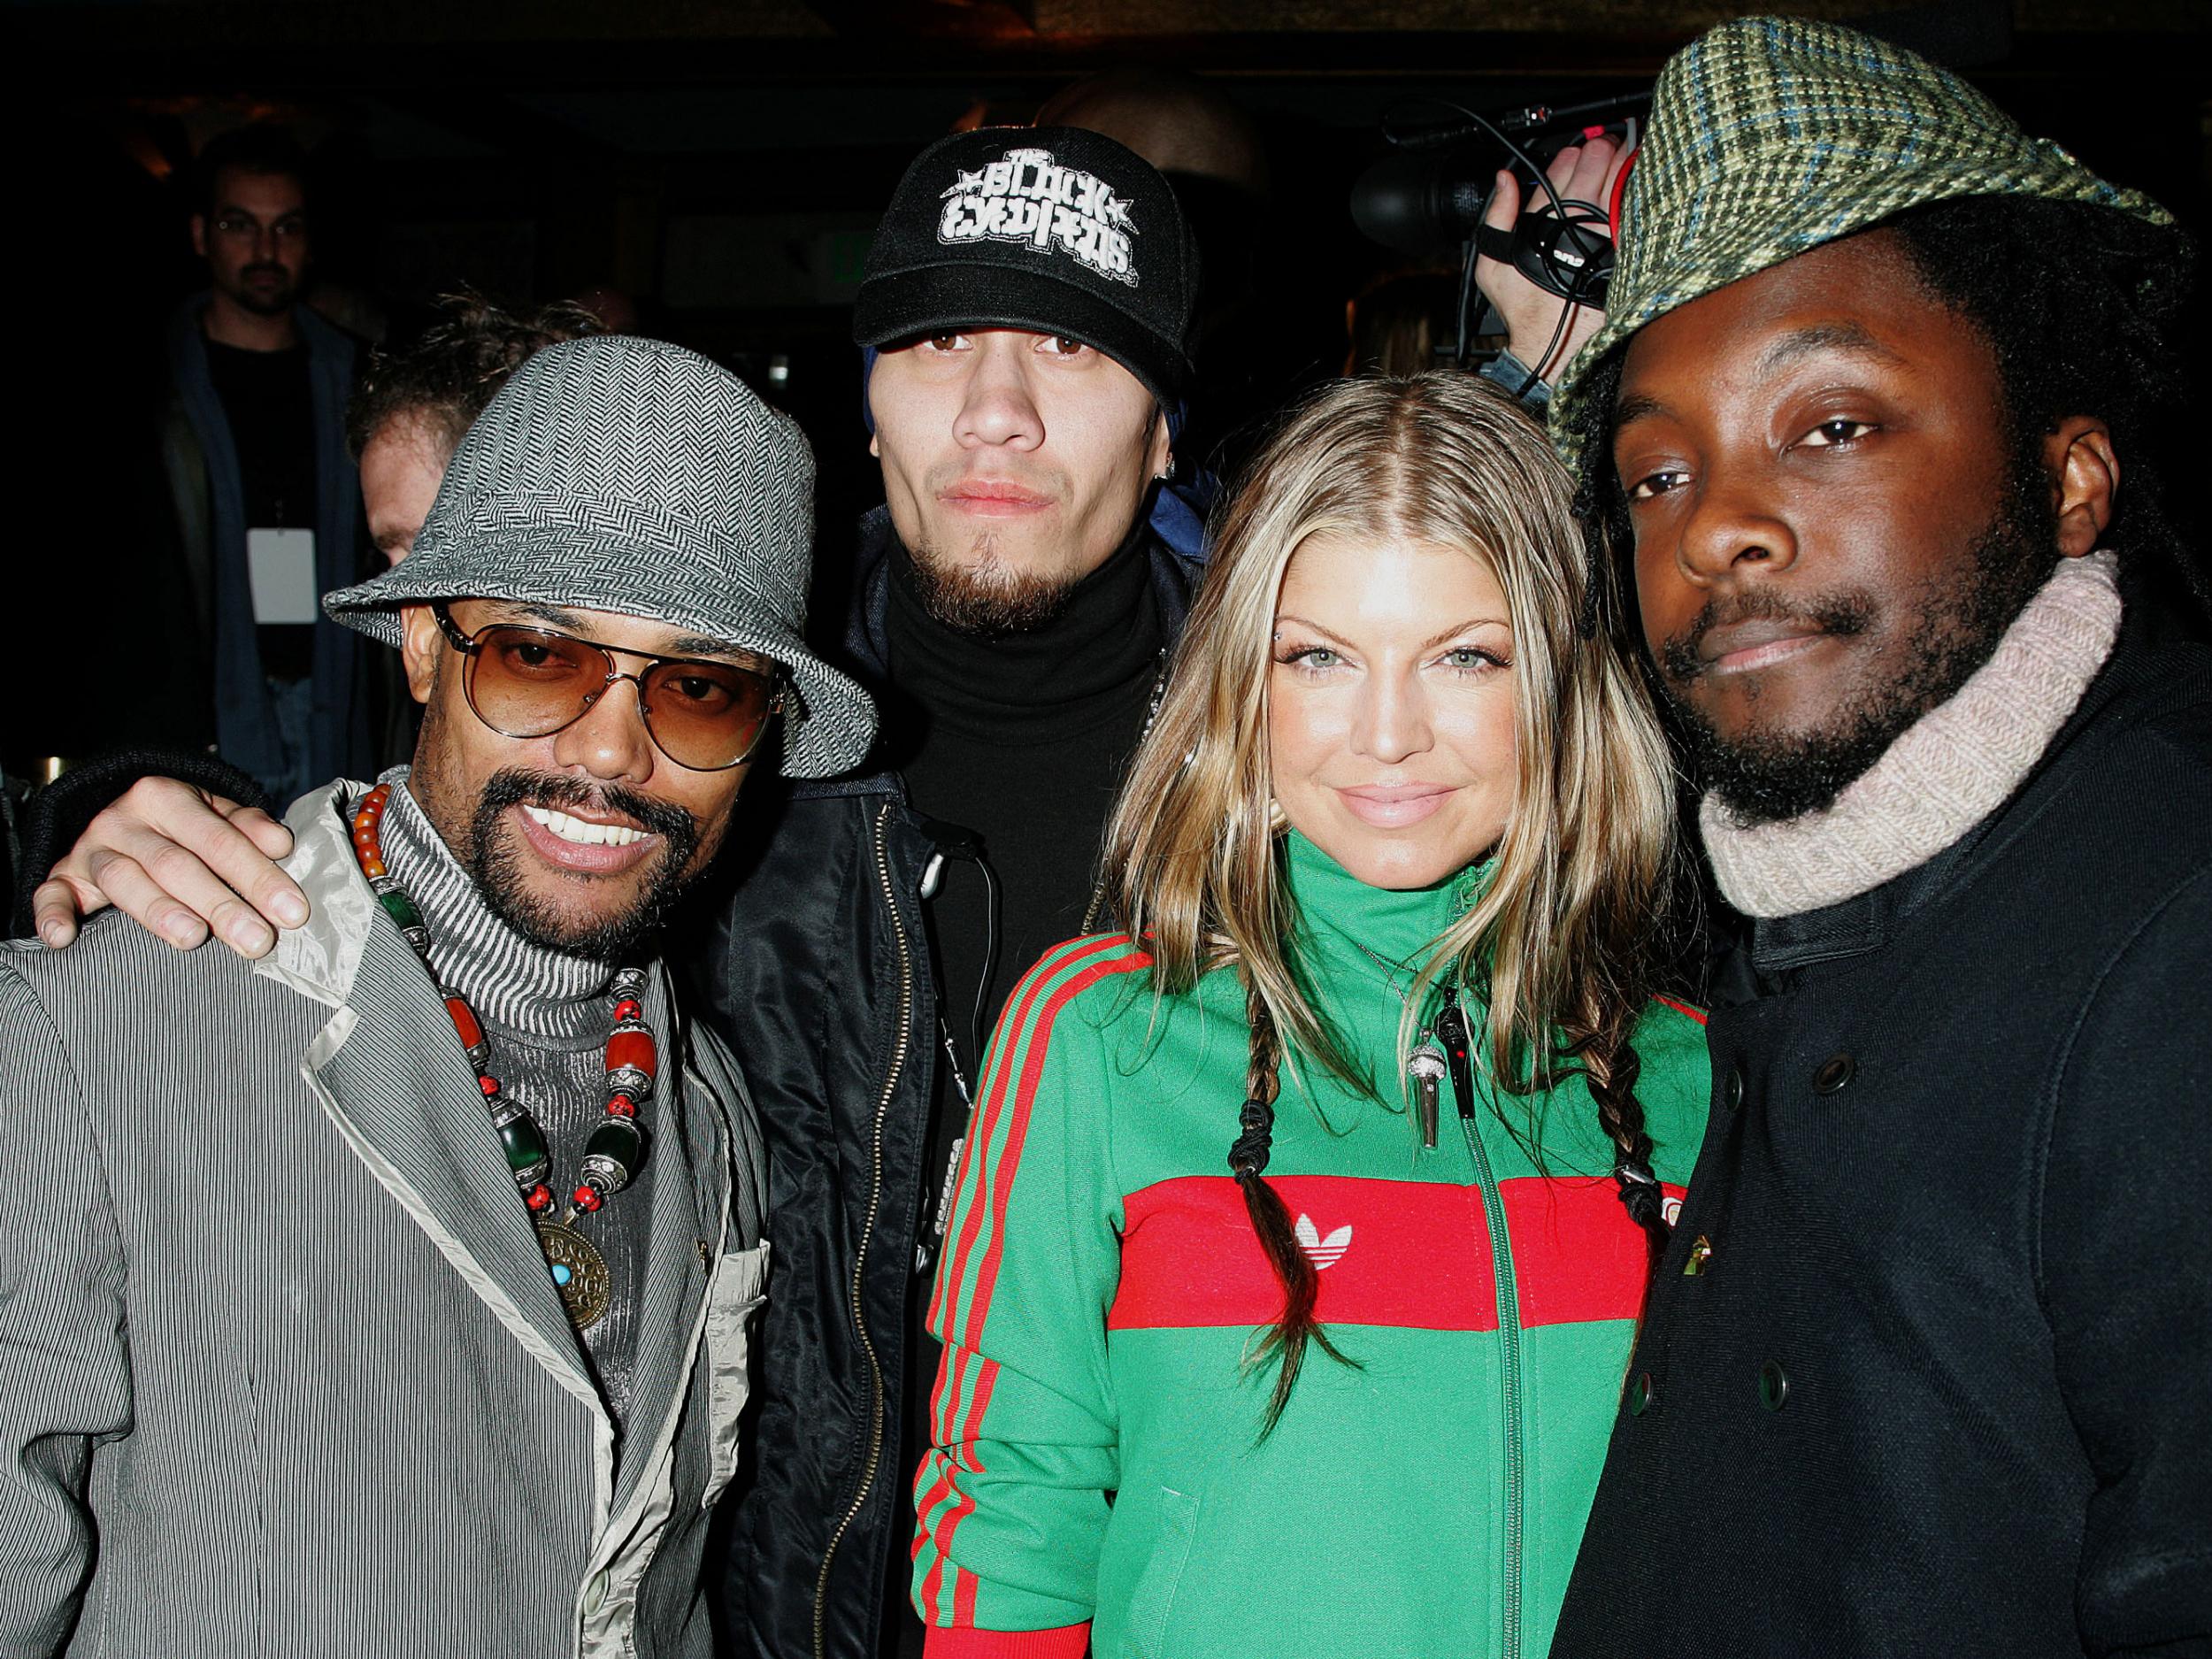 Black Eyed Peas’ ‘Where is the love’ faced no hint of censorship